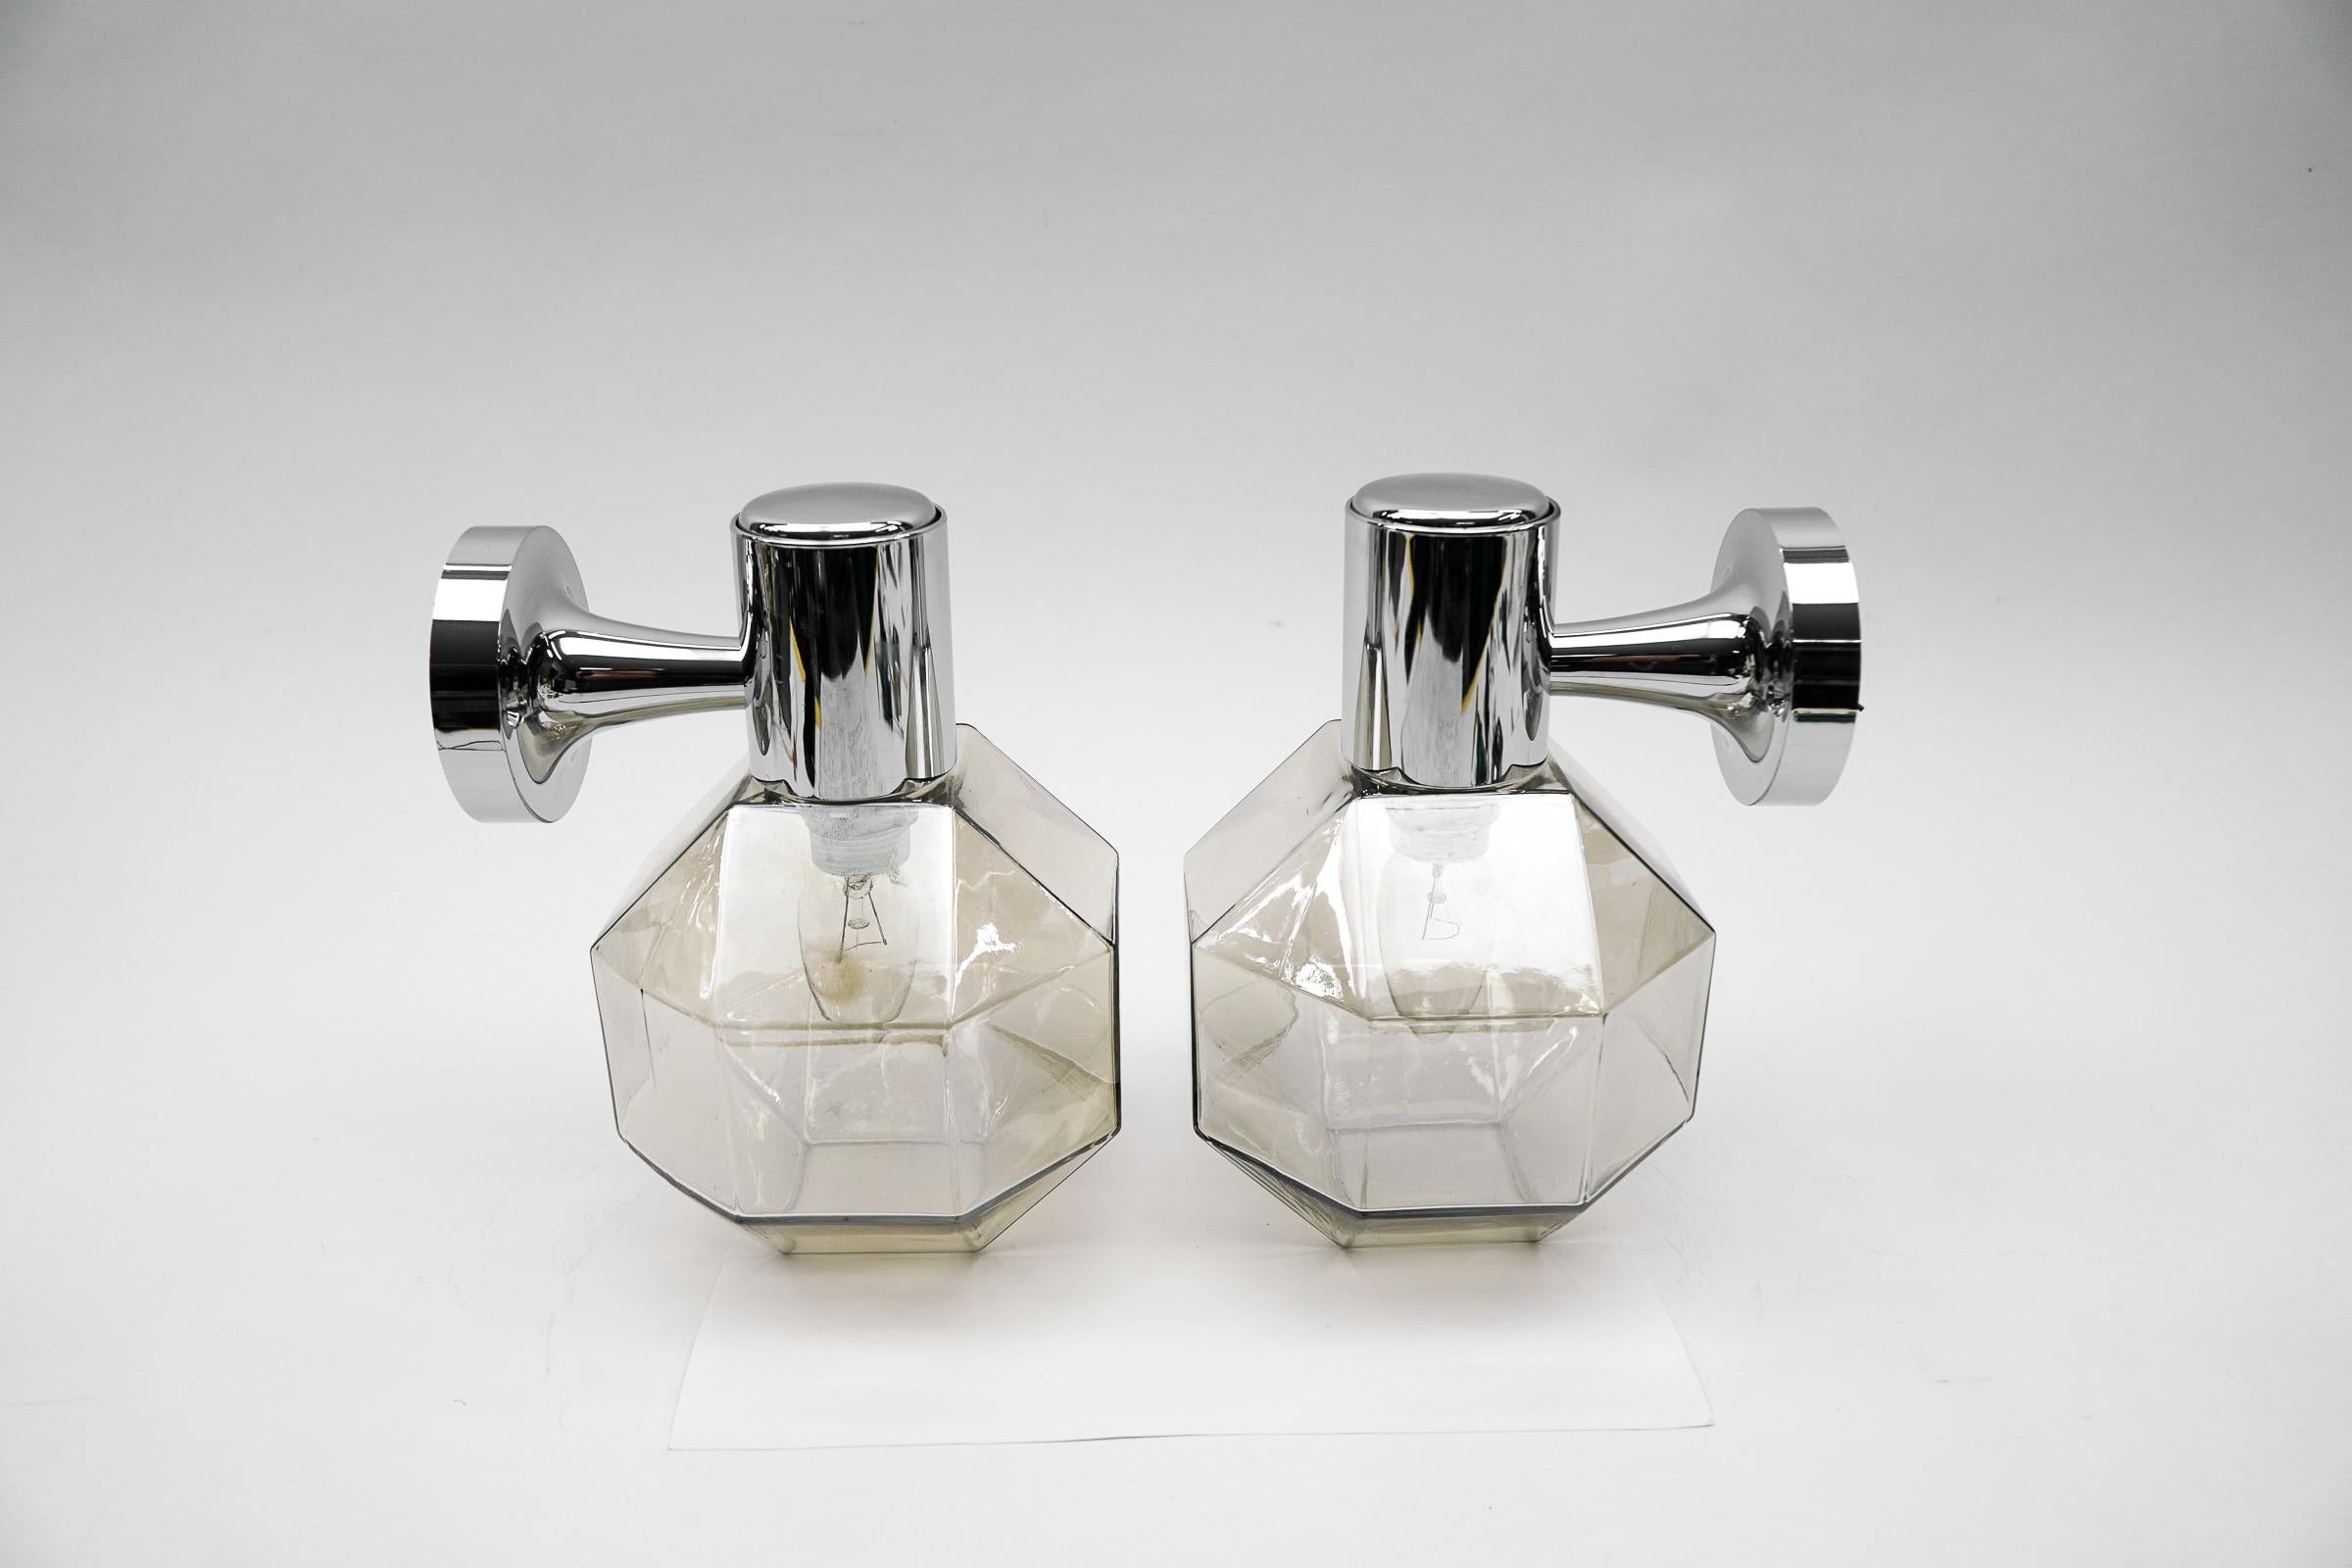 German Pair Geometric Chrome and Smoked Glass Wall Lamps, 1960s For Sale